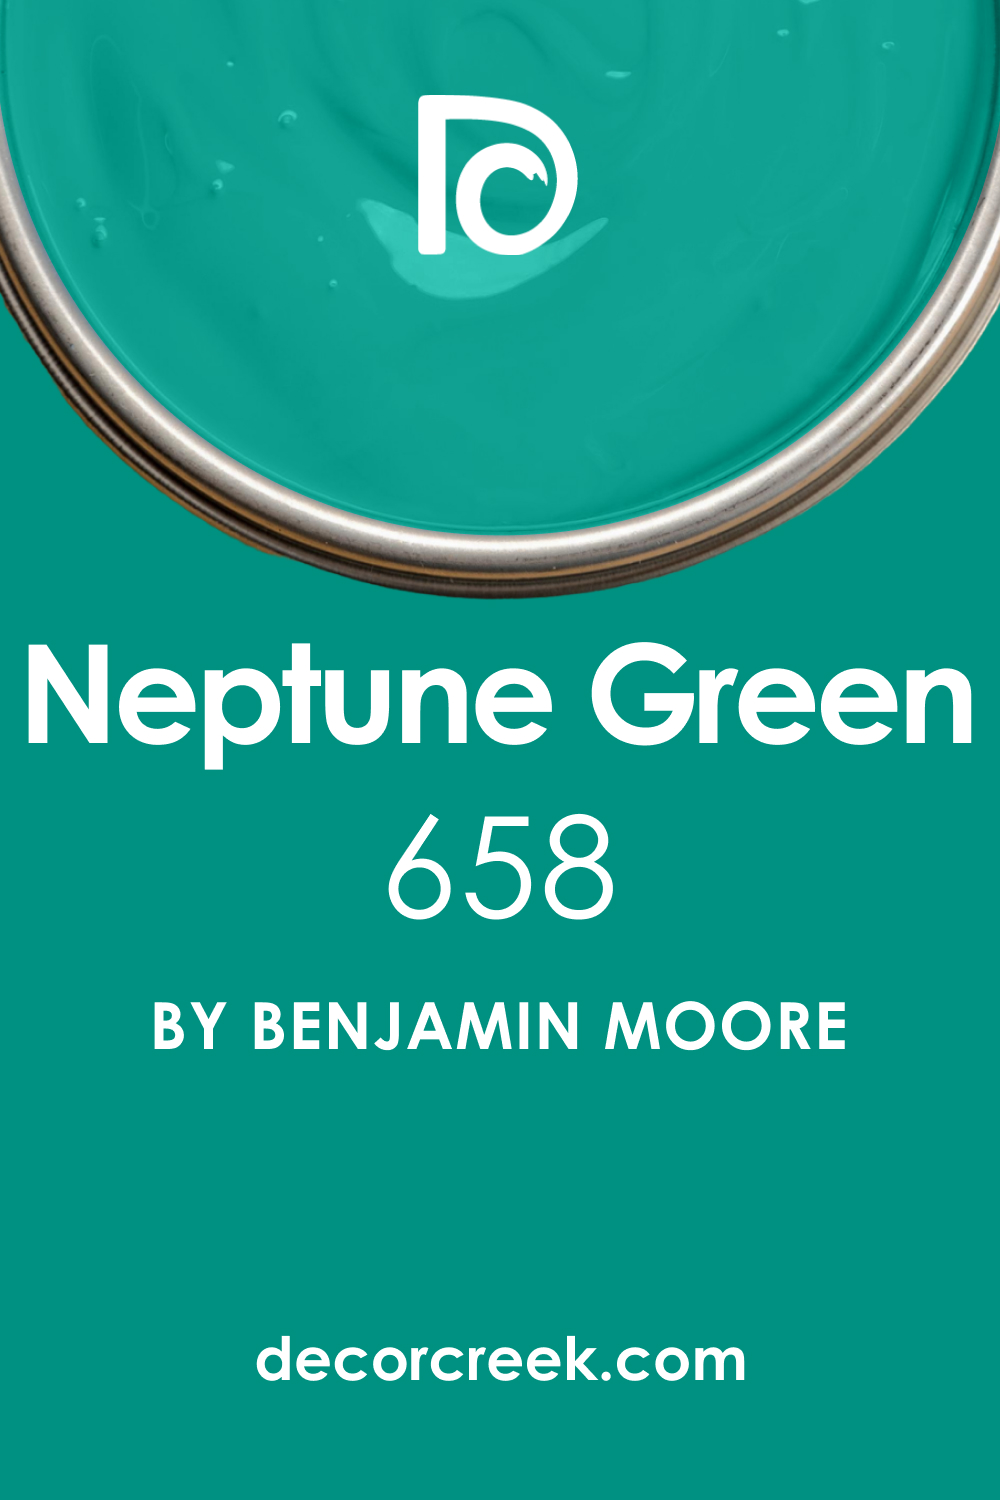 What Color Is Neptune Green 658?